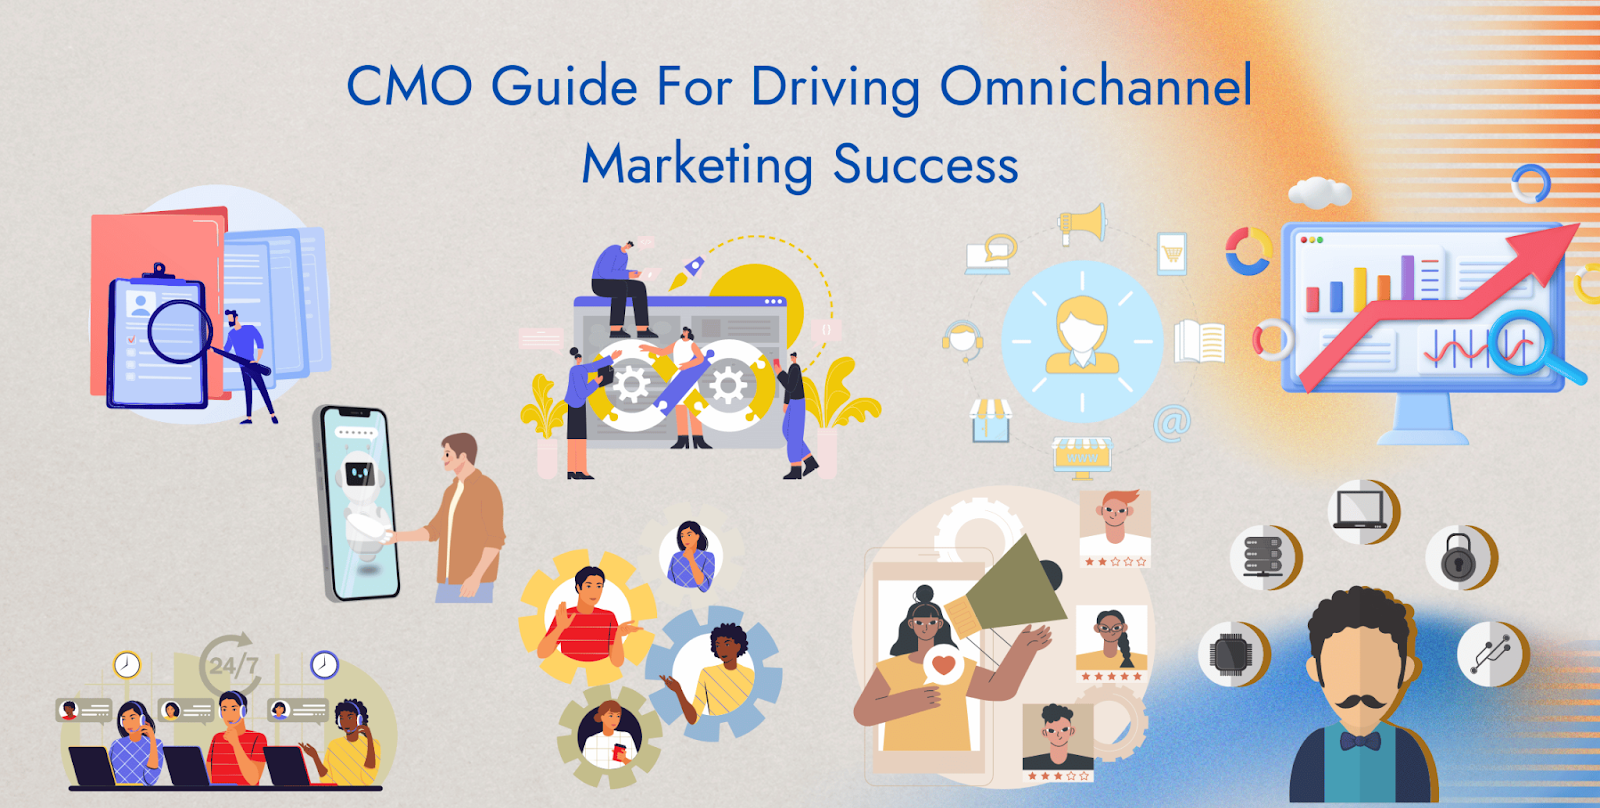 CMO Guide For Driving Omnichannel Marketing Success: